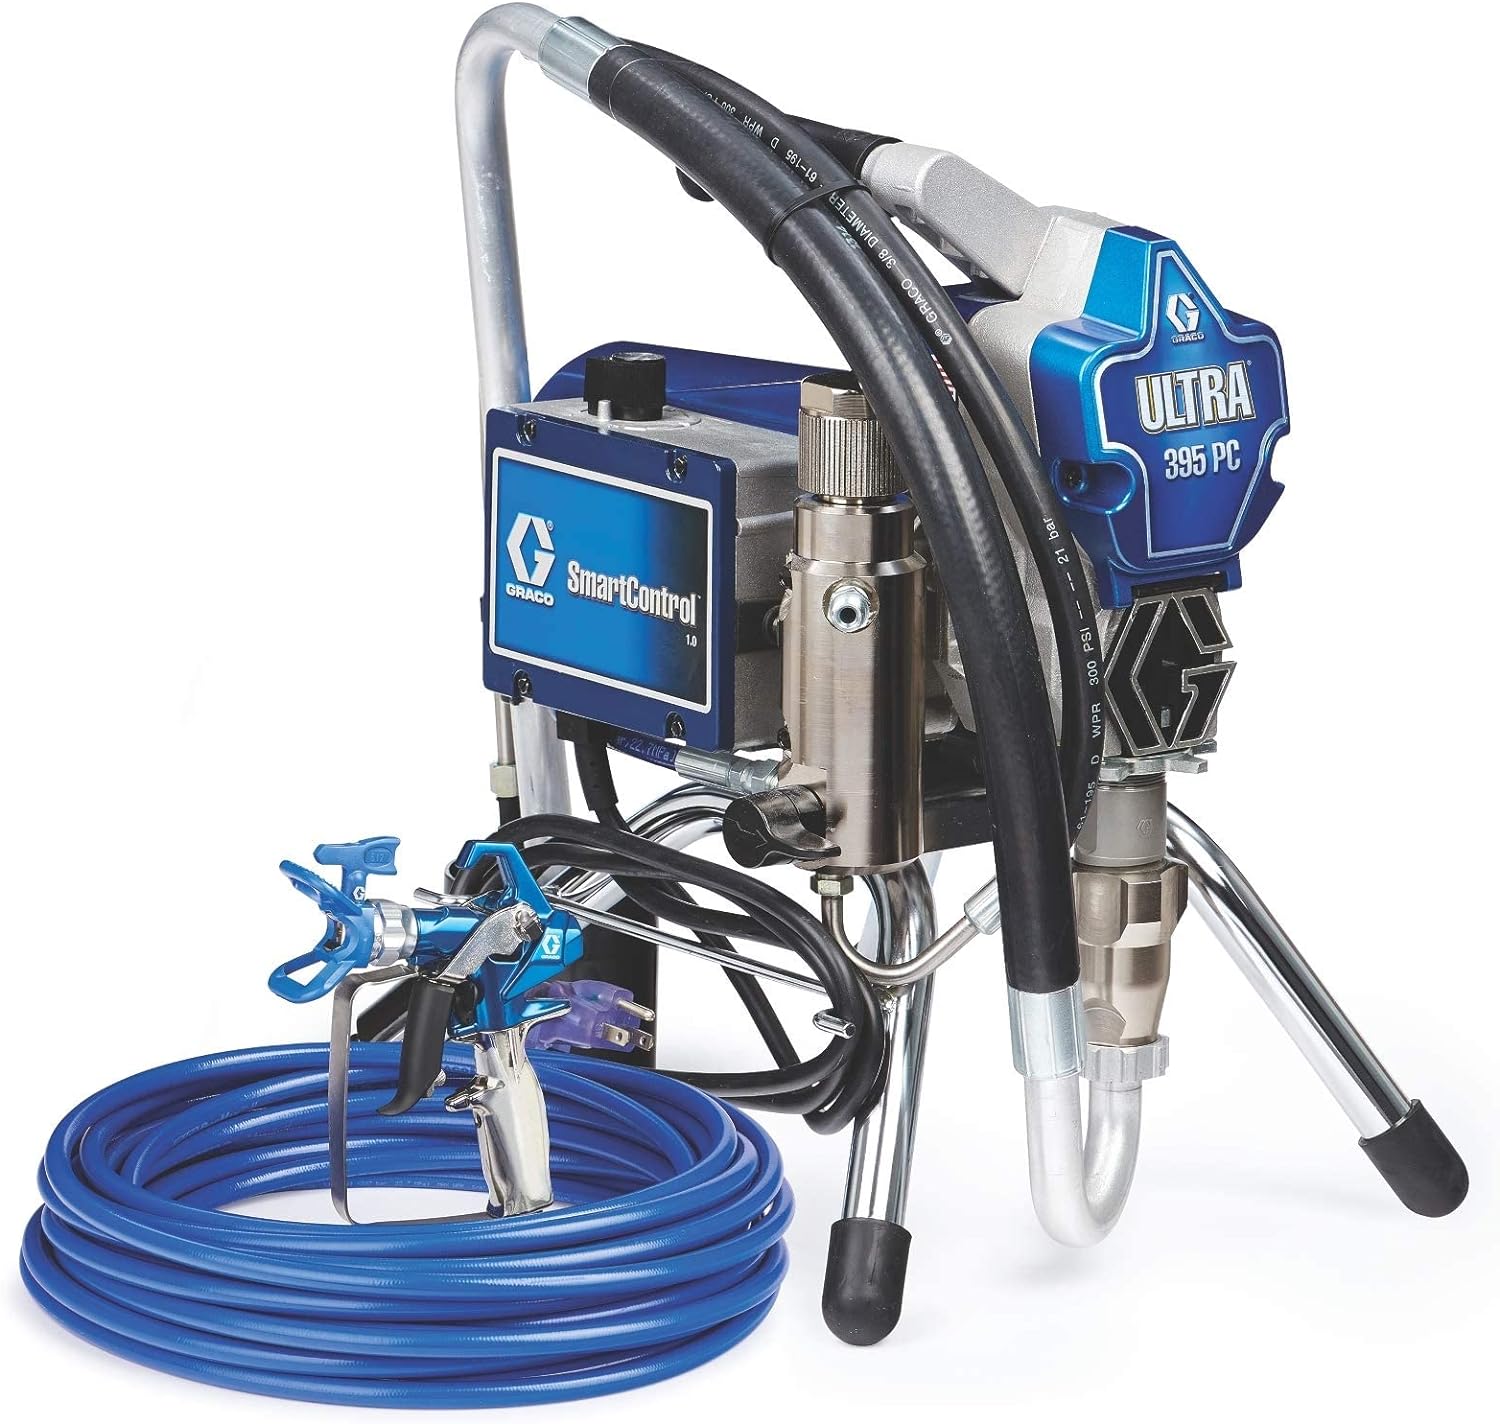 Ultra 395 PC Electric Airless Sprayer, Stand - Contractor's Maintenance Service